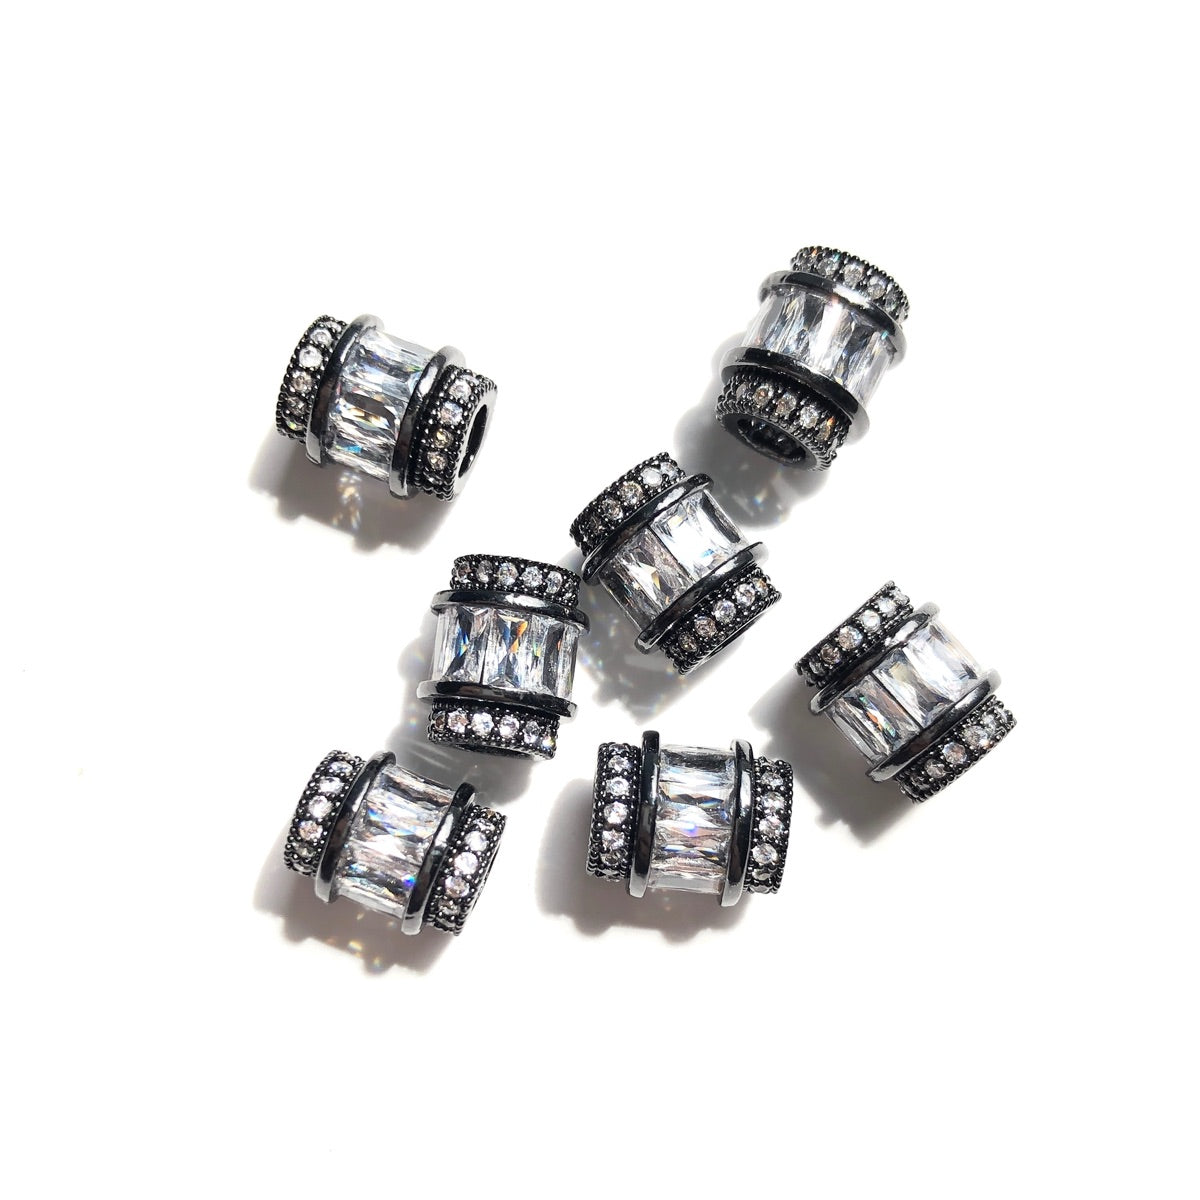 10pcs/lot 9.6/12mm Clear CZ Paved Big Hole Spacers Black CZ Paved Spacers Big Hole Beads New Spacers Arrivals Charms Beads Beyond